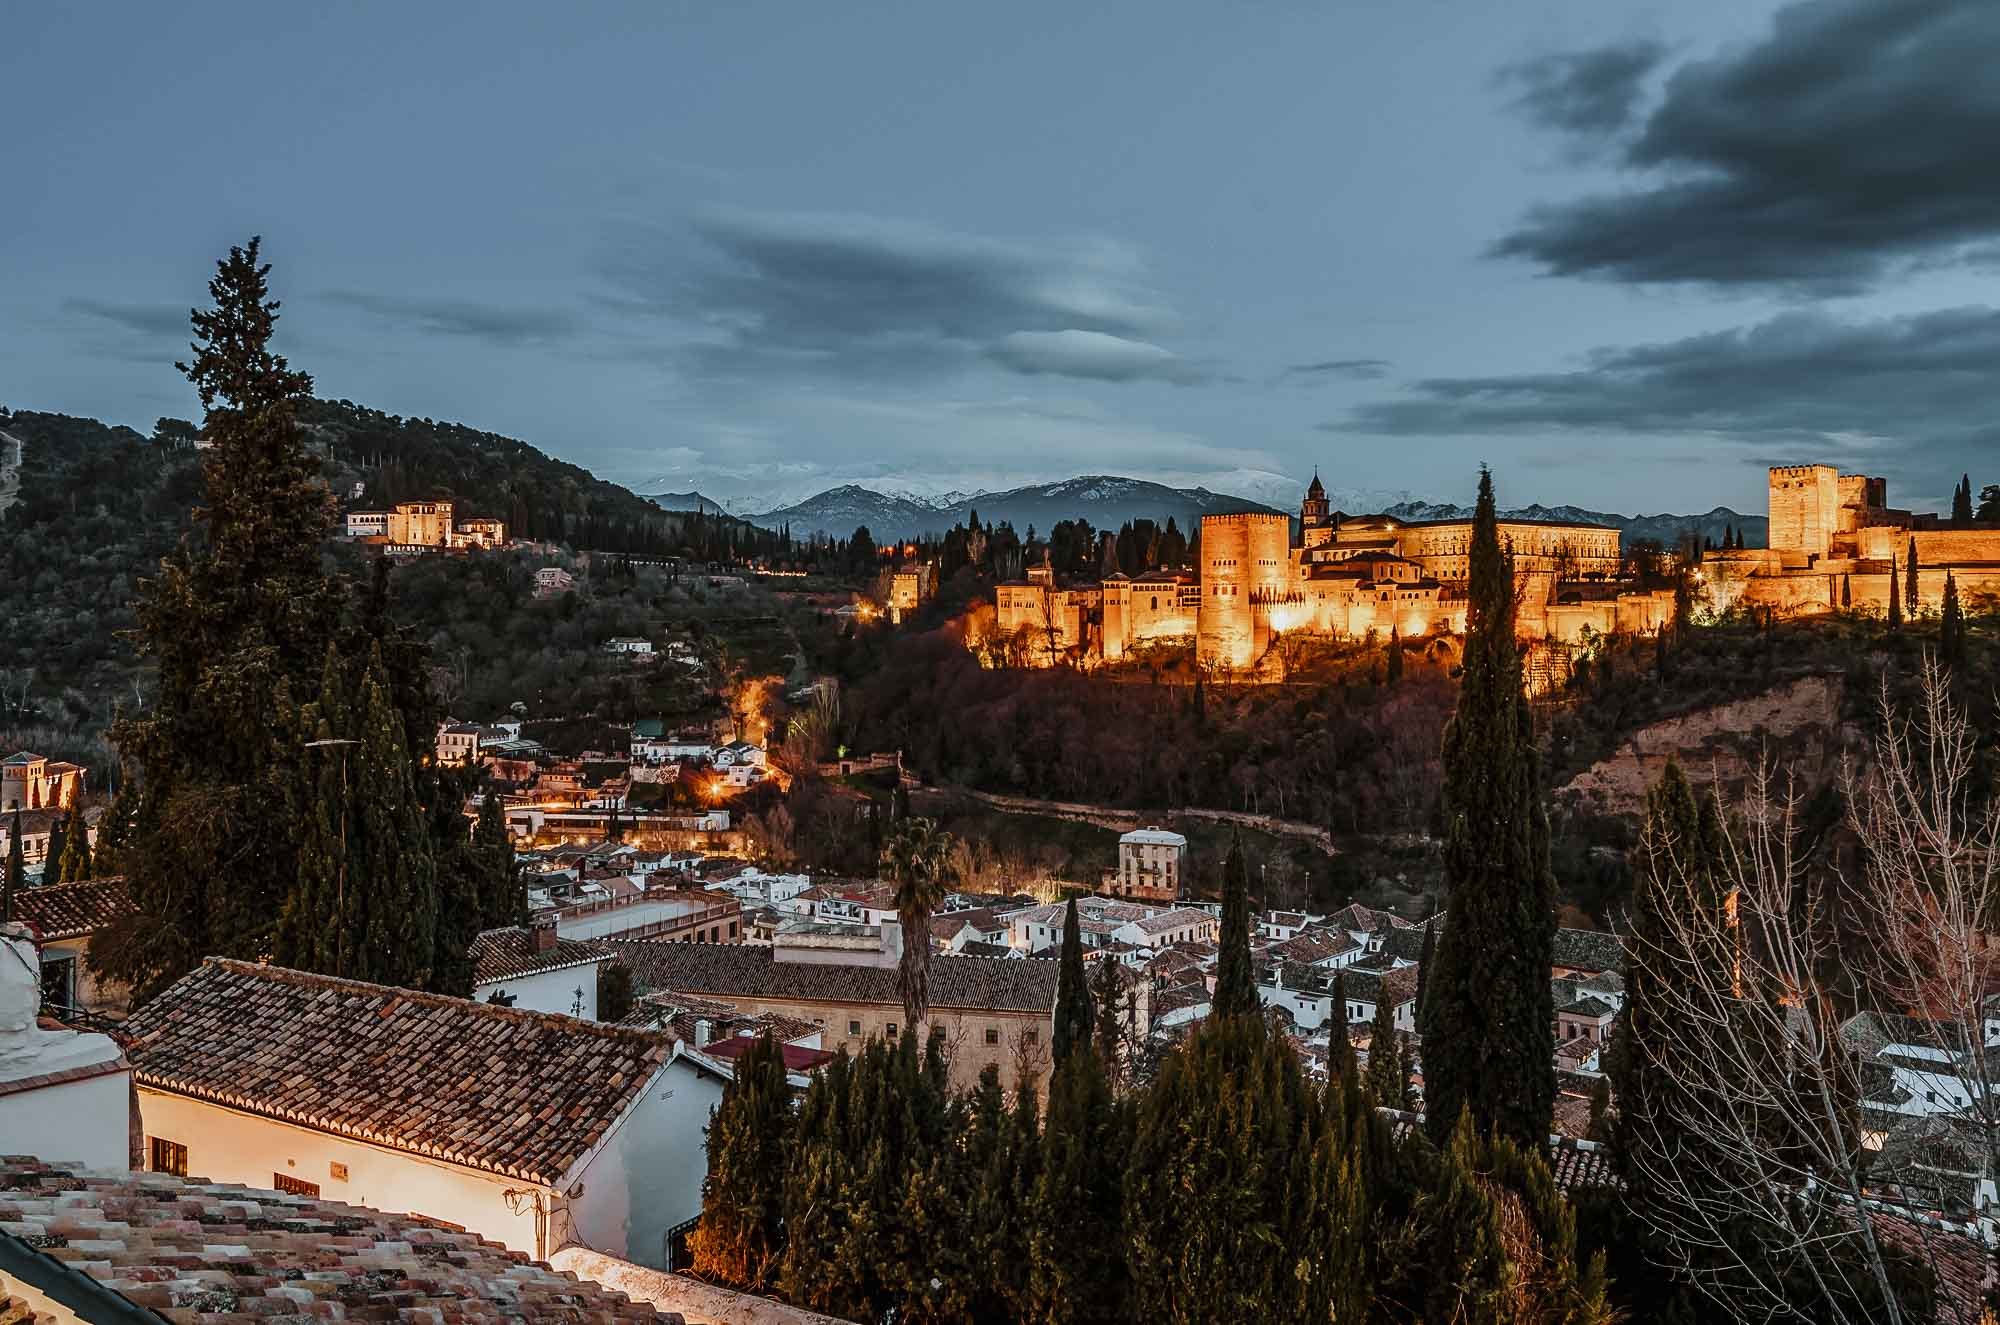 The Alhambra by night all lit up with the Albaicin neighborhood on the side